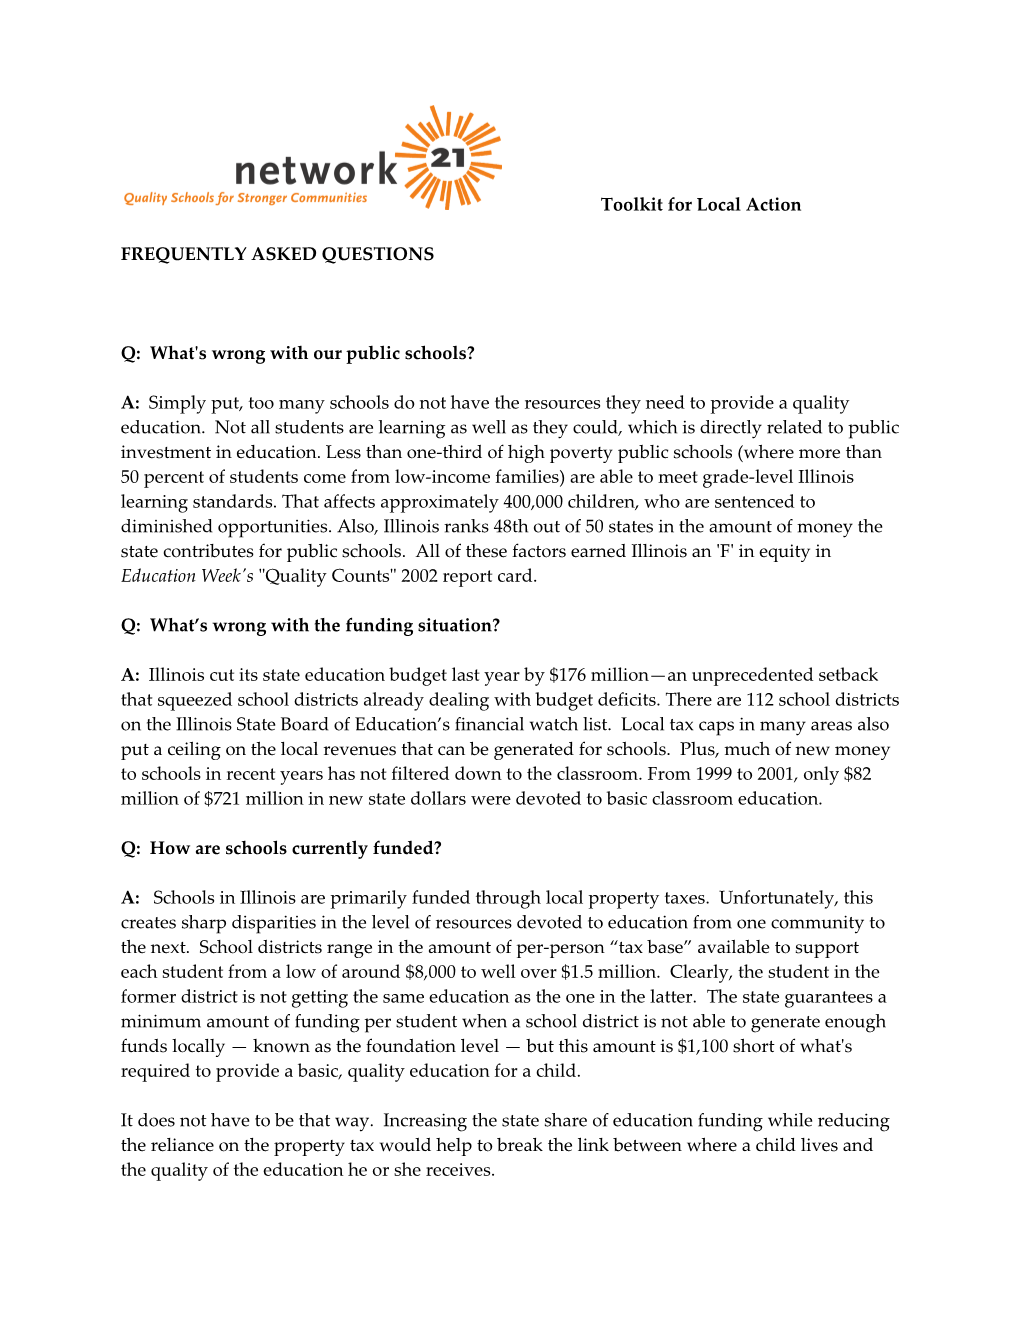 Network 21 Launches Statewide School Reform Campaign; Coalition Highlights Urgent Need